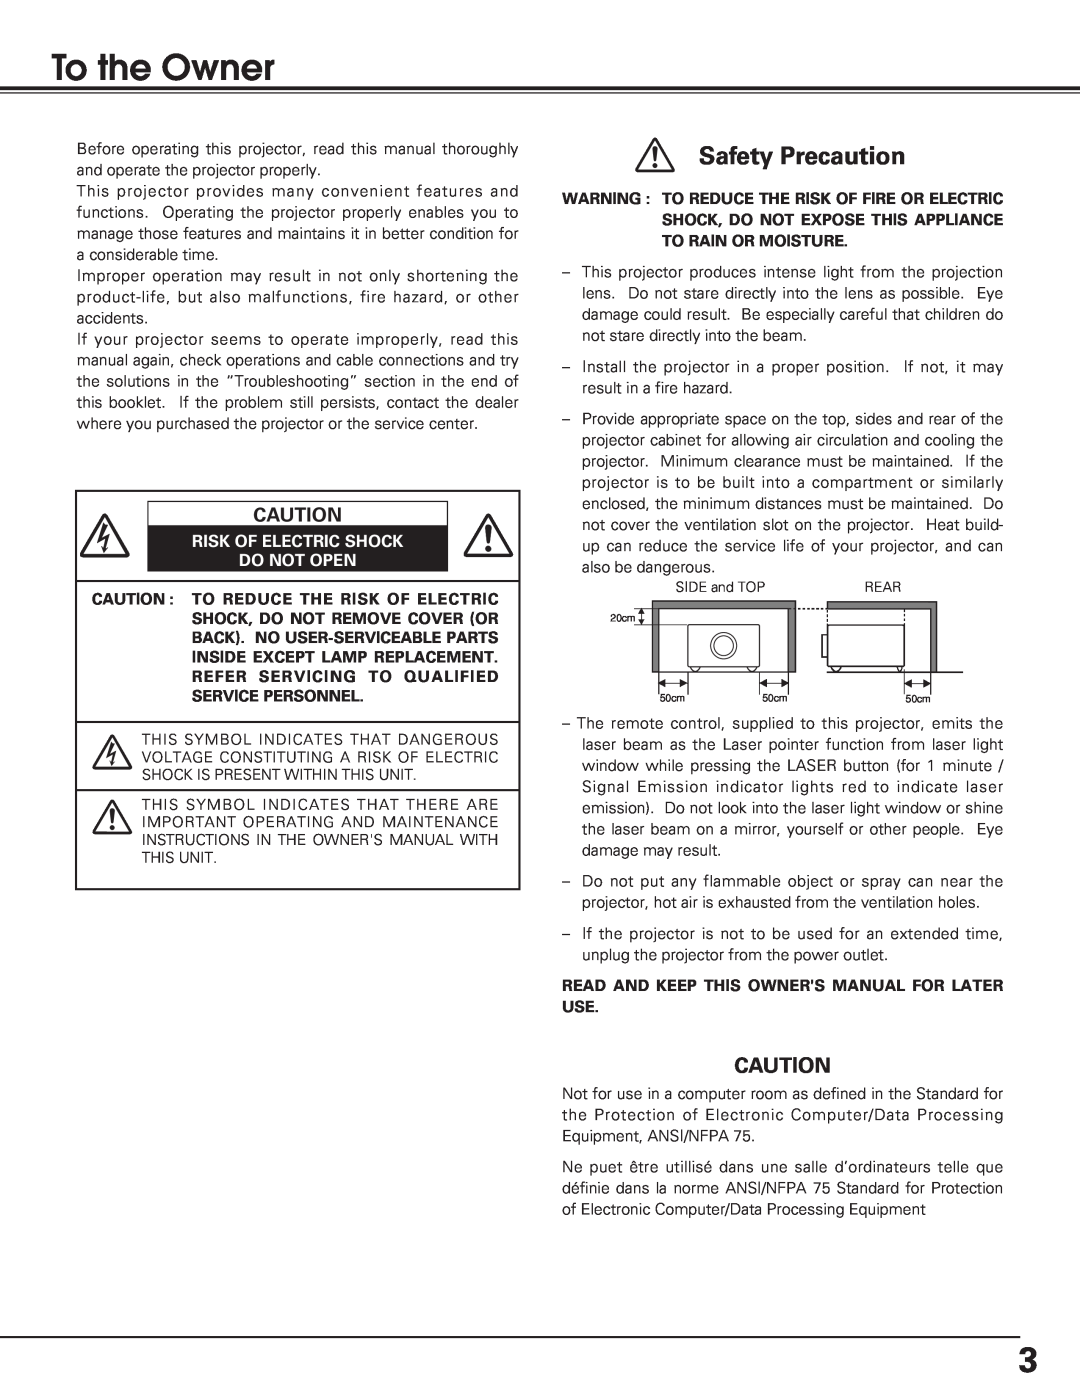 Eiki lc-sb15 owner manual To the Owner, Safety Precaution, Risk Of Electric Shock Do Not Open 